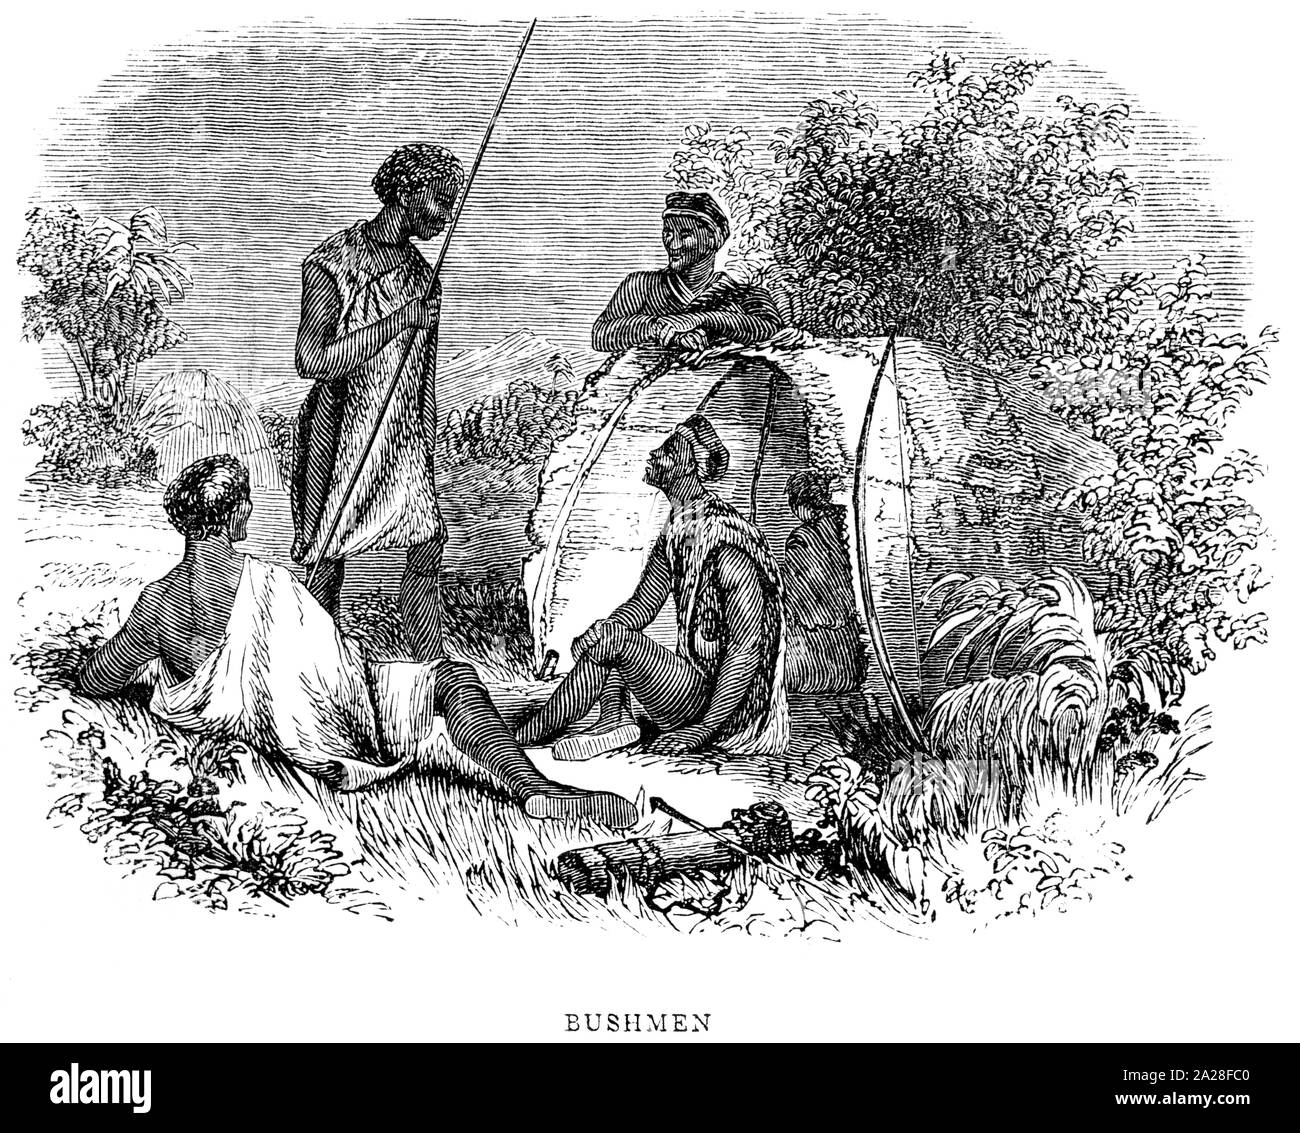 An illustration Bushmen in South Africa scanned at high resolution from a book by Robert Moffat  printed in 1842. Believed copyright free. Stock Photo